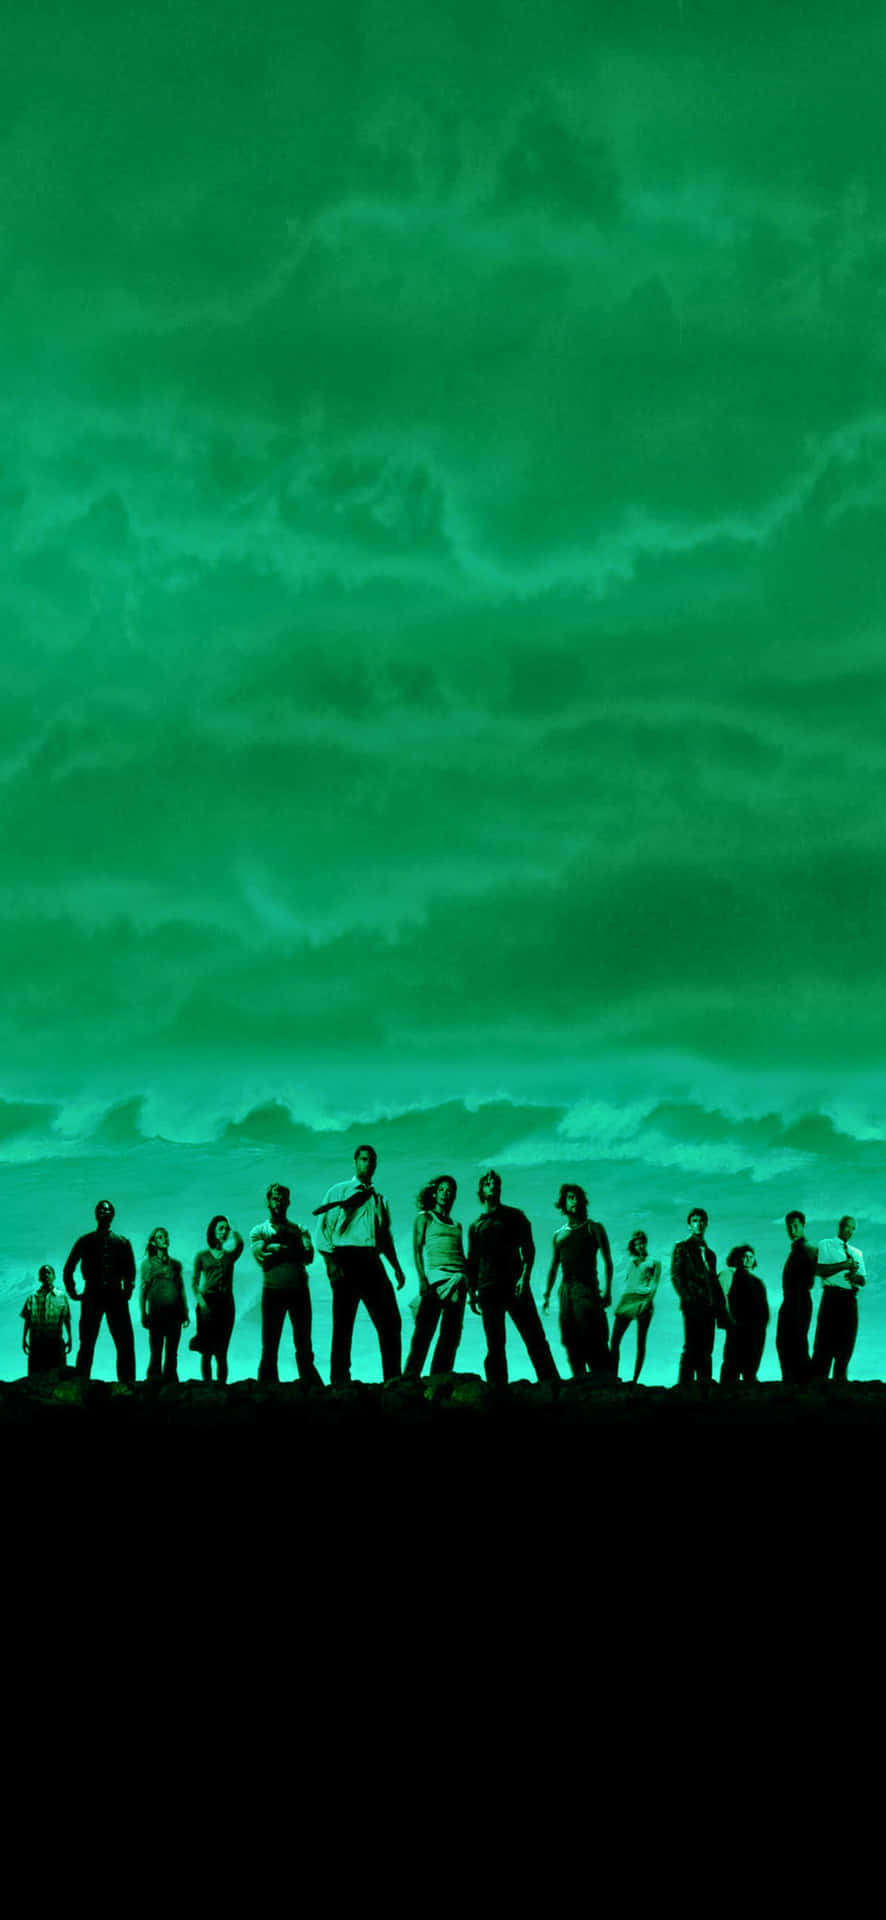 Silhouetted People Against Green Sky Wallpaper